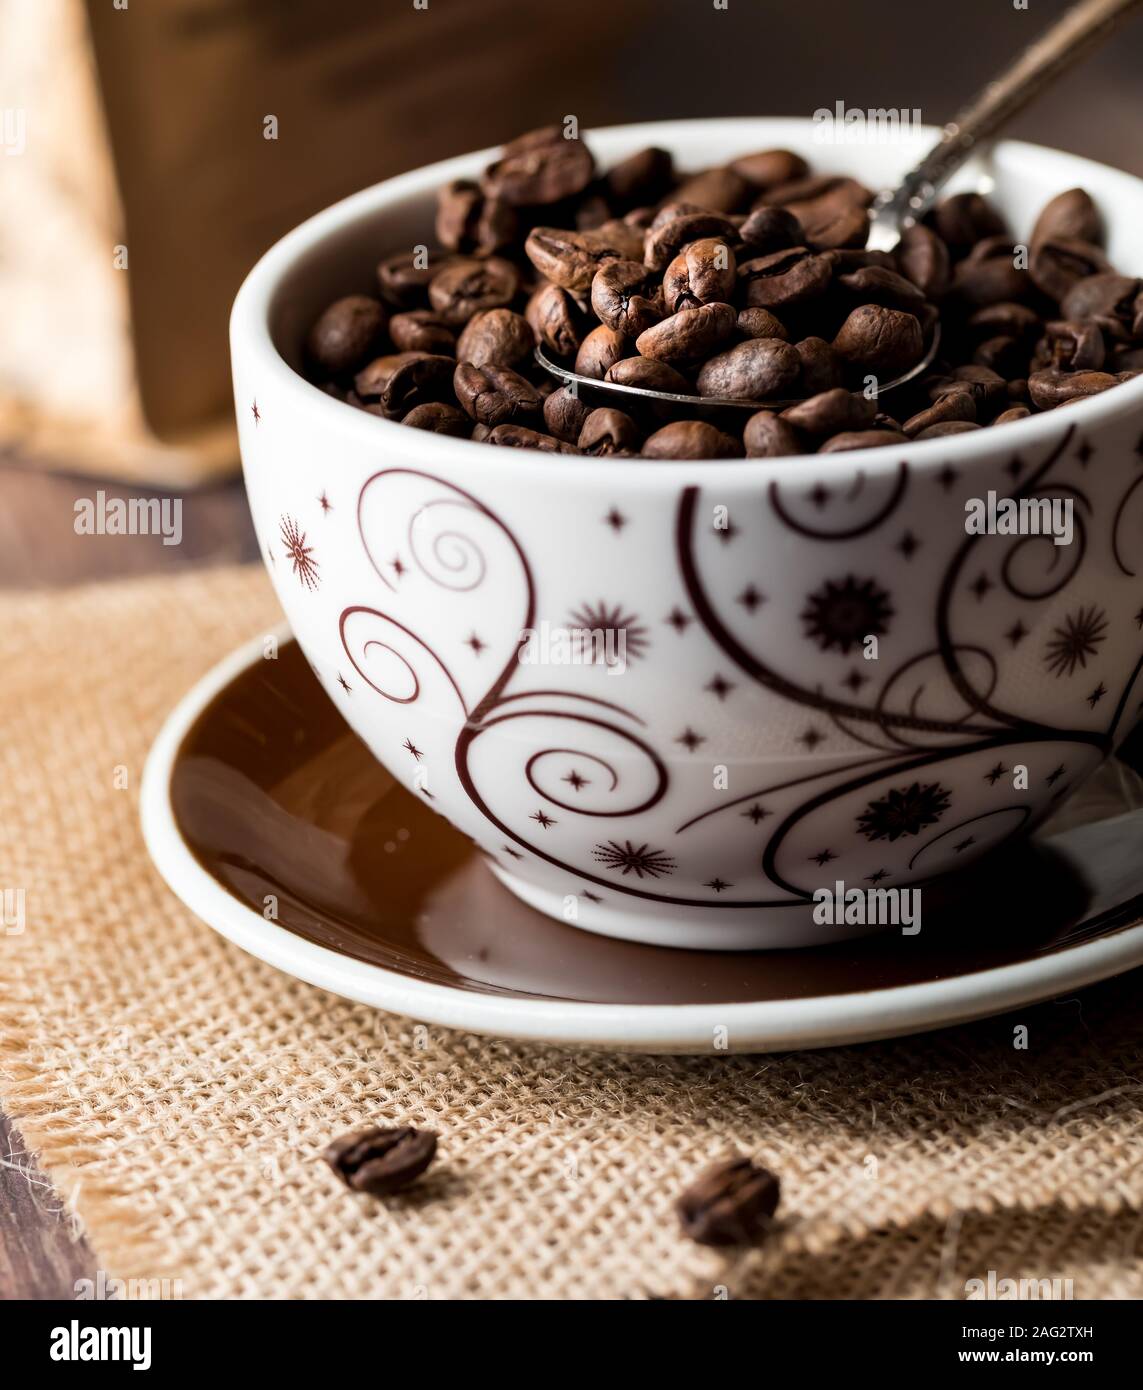 Cup full of coffee beans. Stock Photo